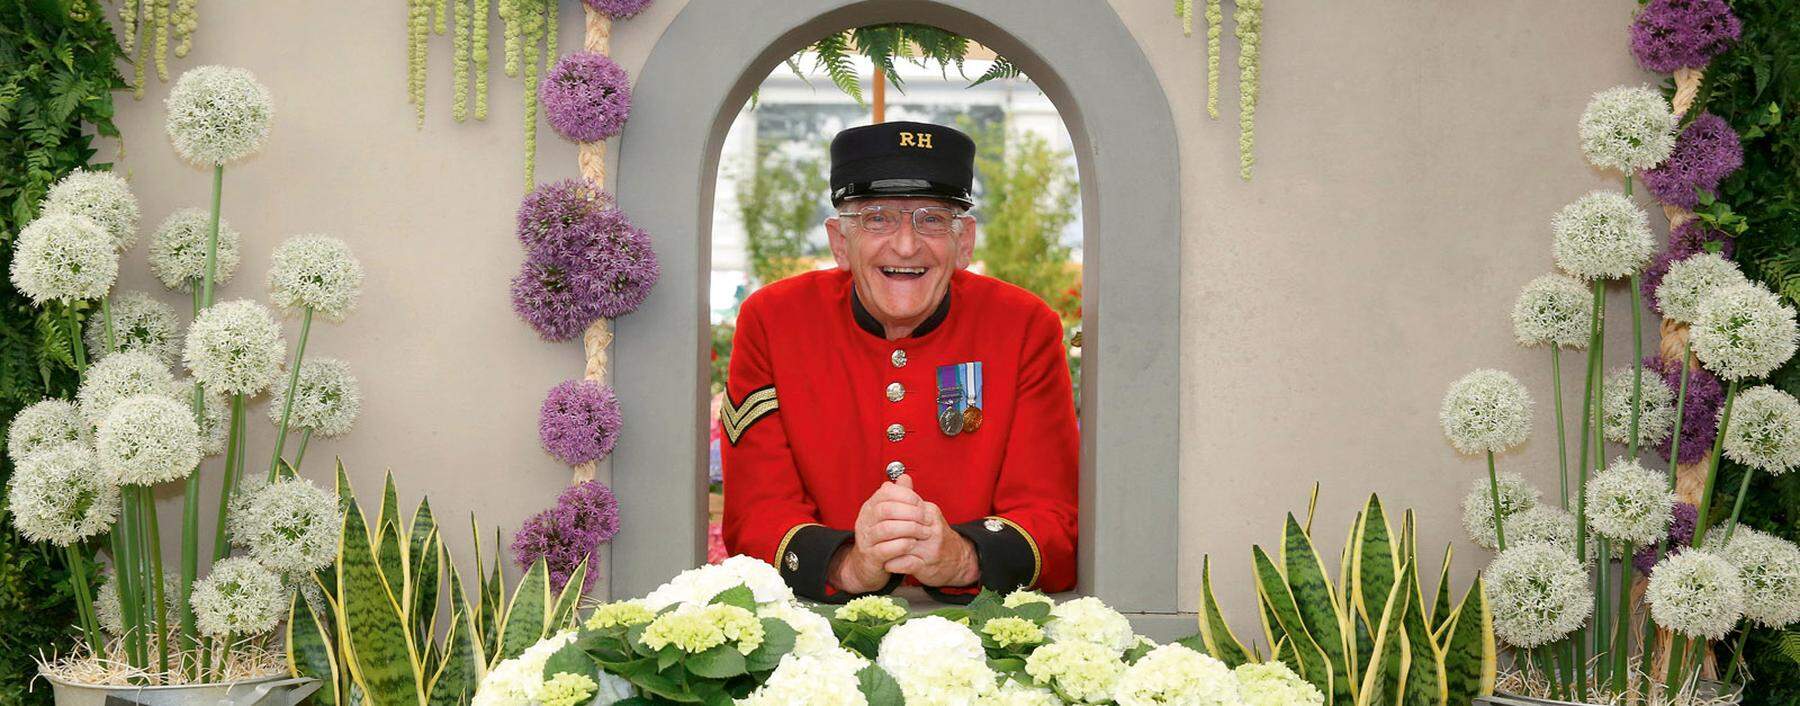 Chelsea Pensioner Paul Whittick enjoys the display on the Marks and Spencer Floral Market exhibition during press day at the RHS Chelsea Flower Show 2018 in London Monday, May 21, 2018..RHS / Luke MacGregor